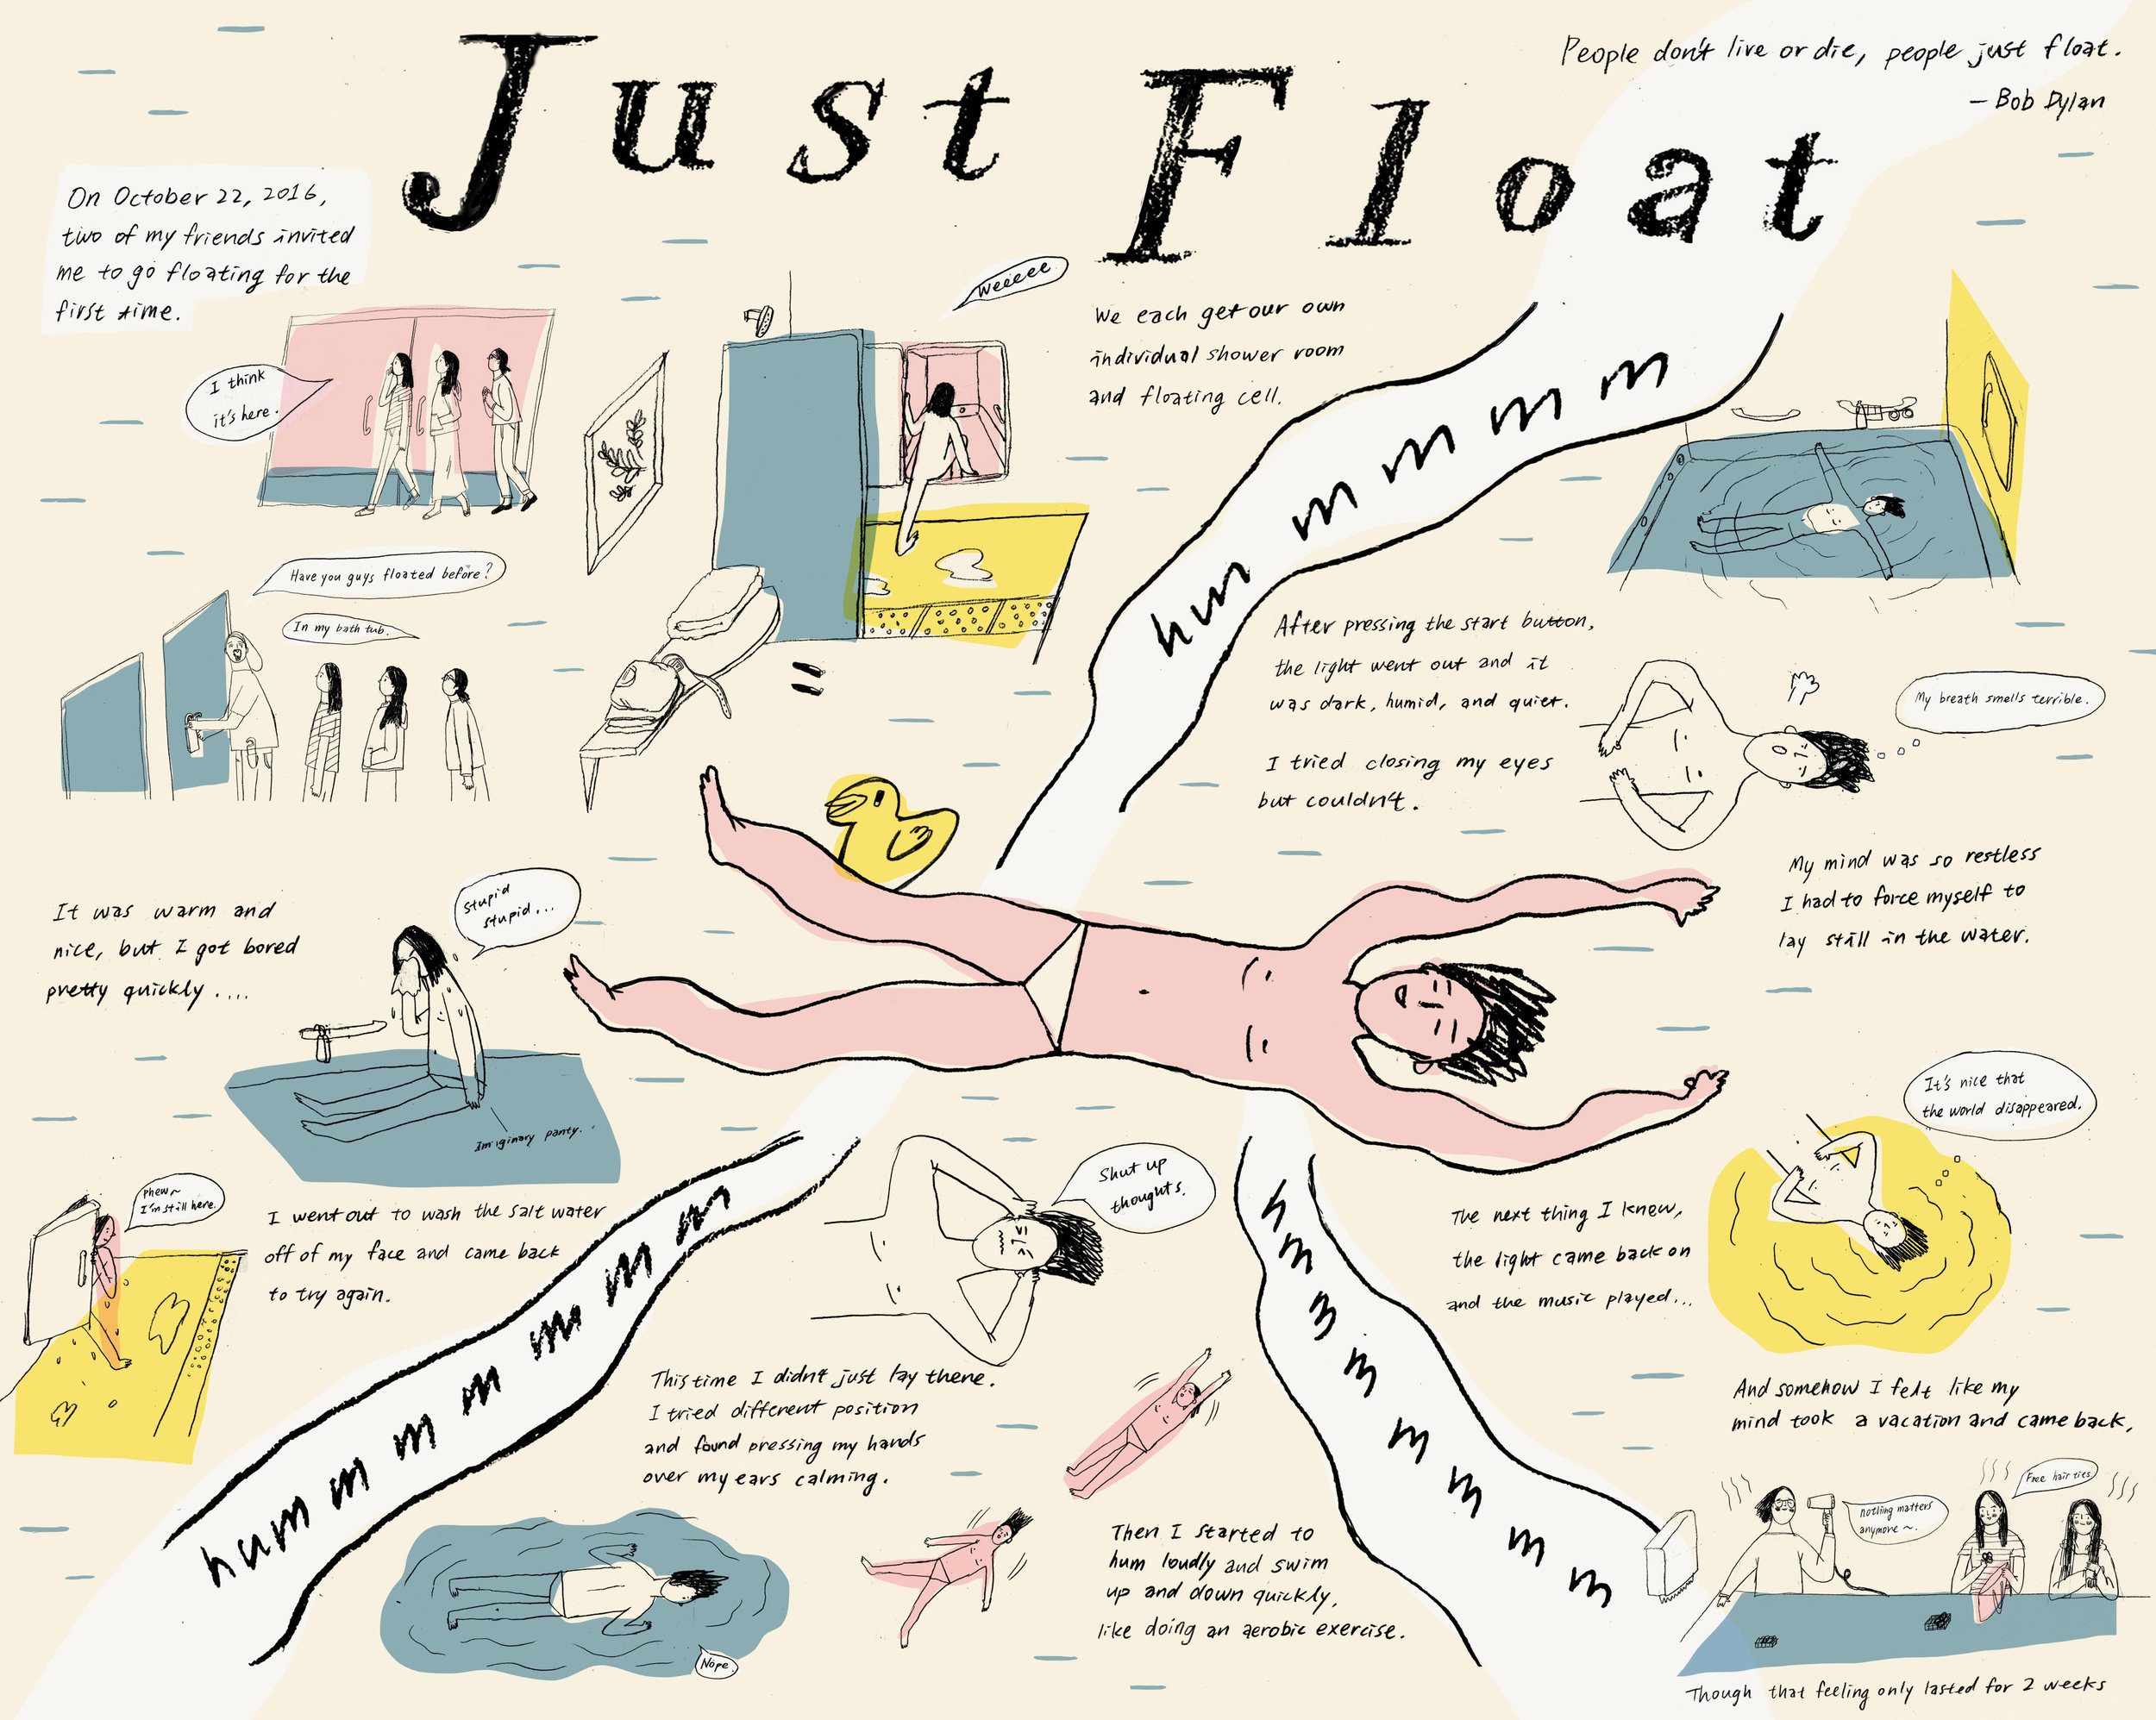 Just Float